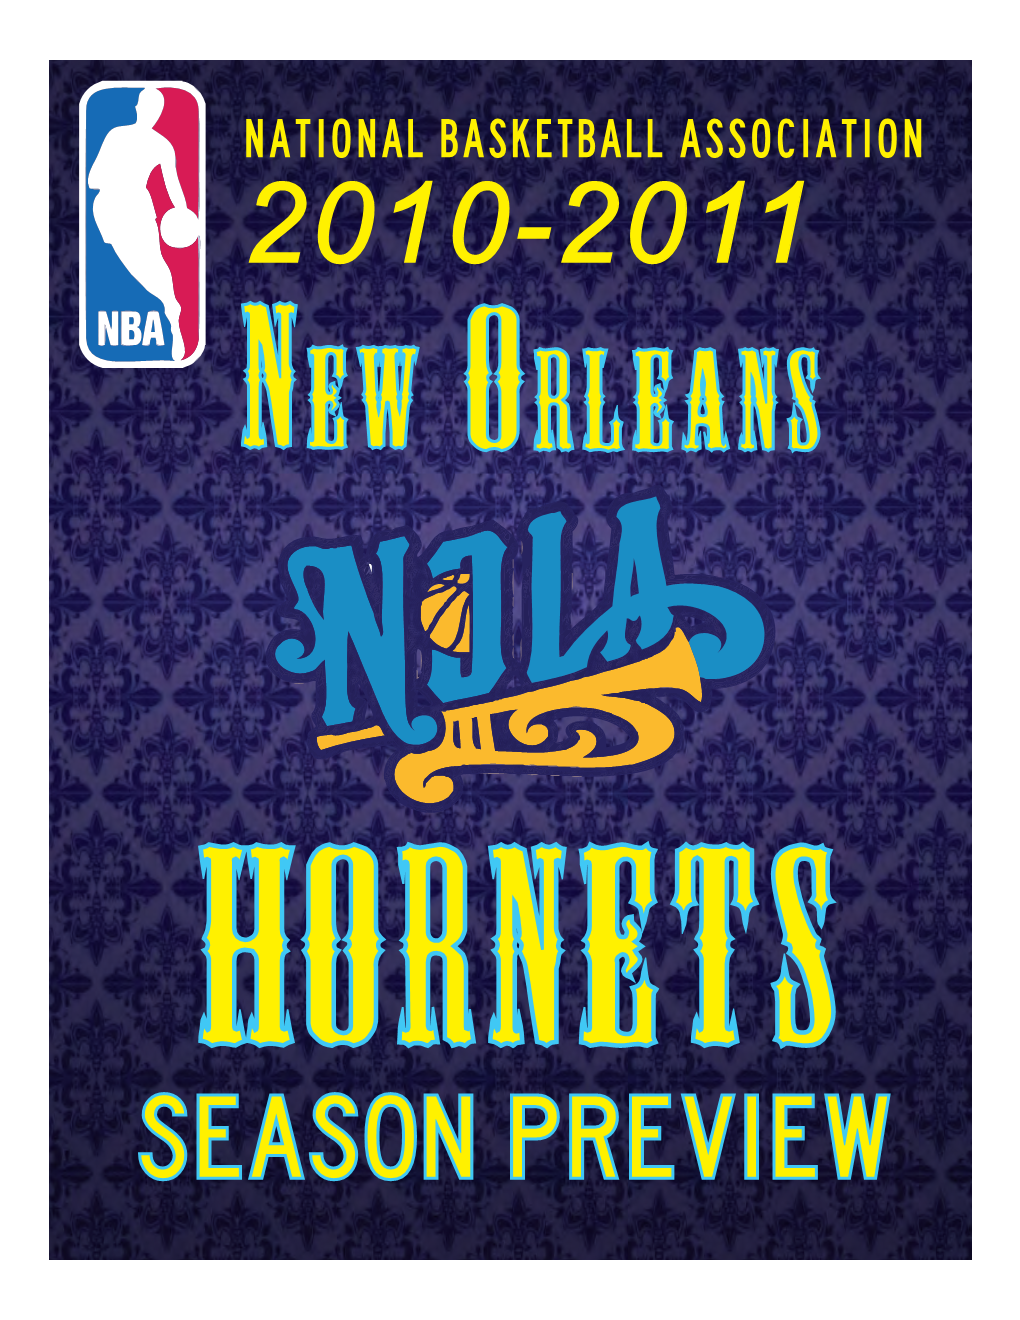 Season Preview 2 Hornets Season Preview Table of Contents Owners & Management